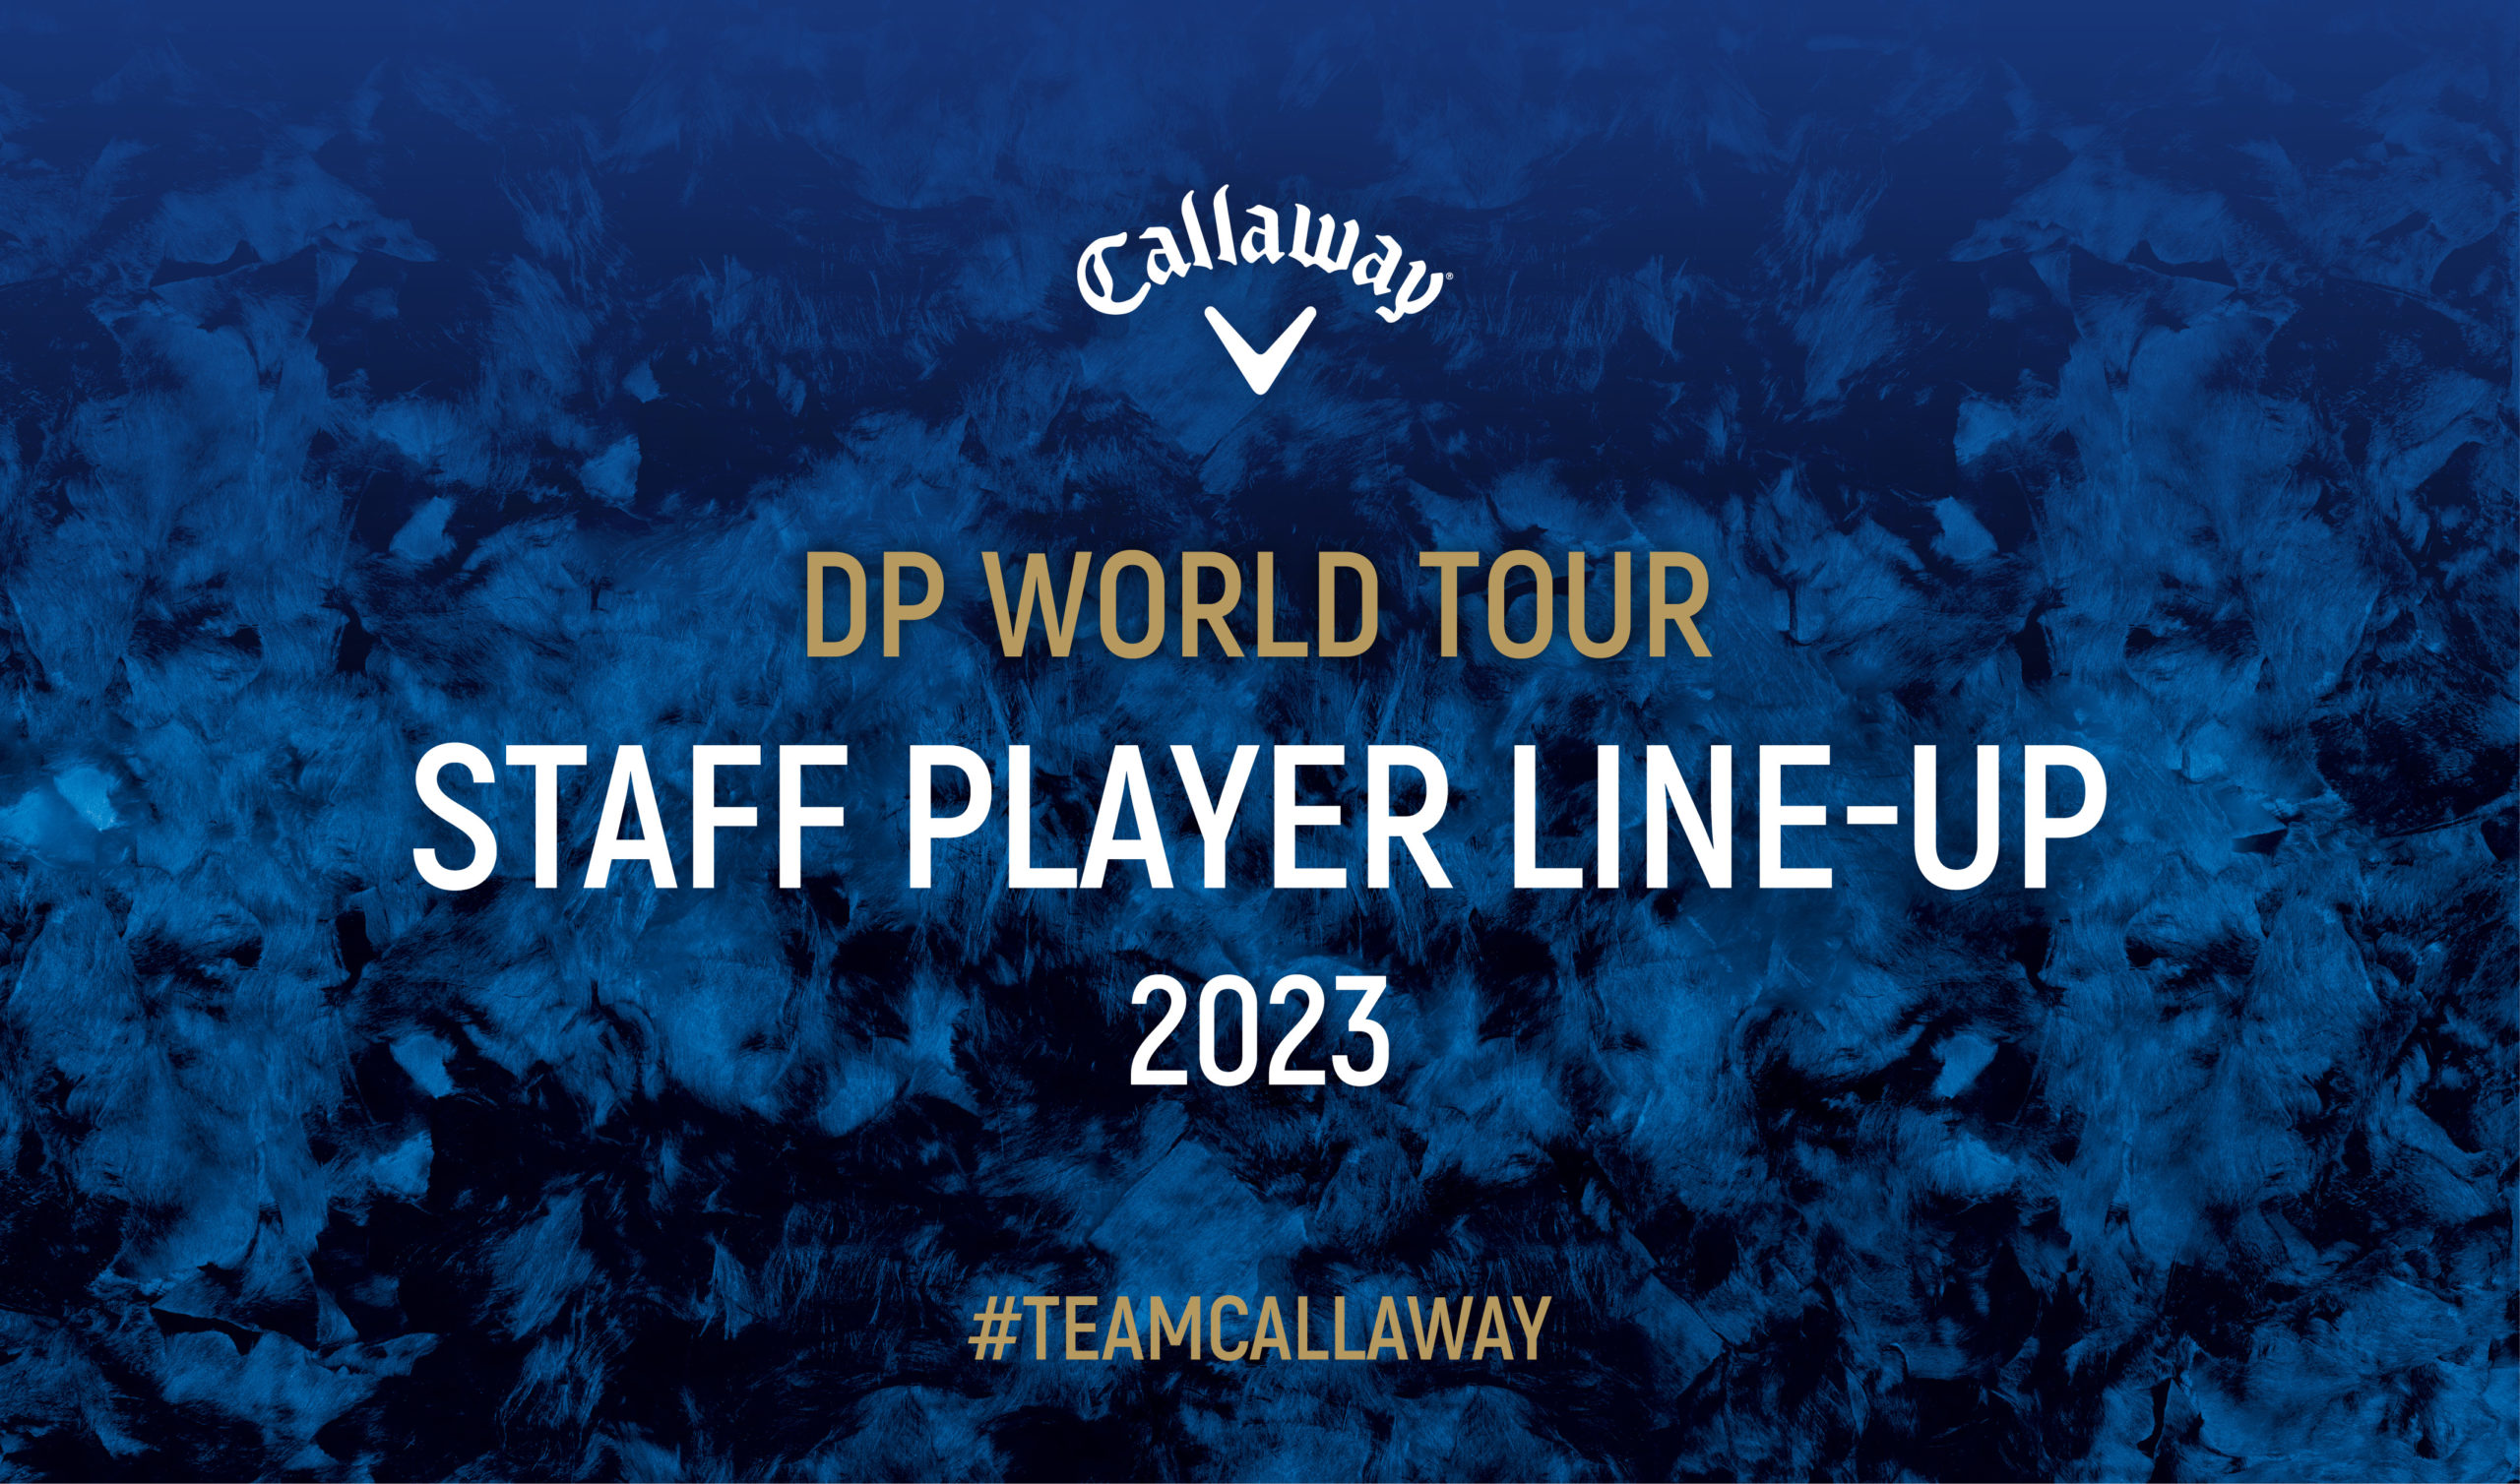 CALLAWAY ANNOUNCES DP WORLD TOUR STAFF PLAYER LINE-UP FOR 2023